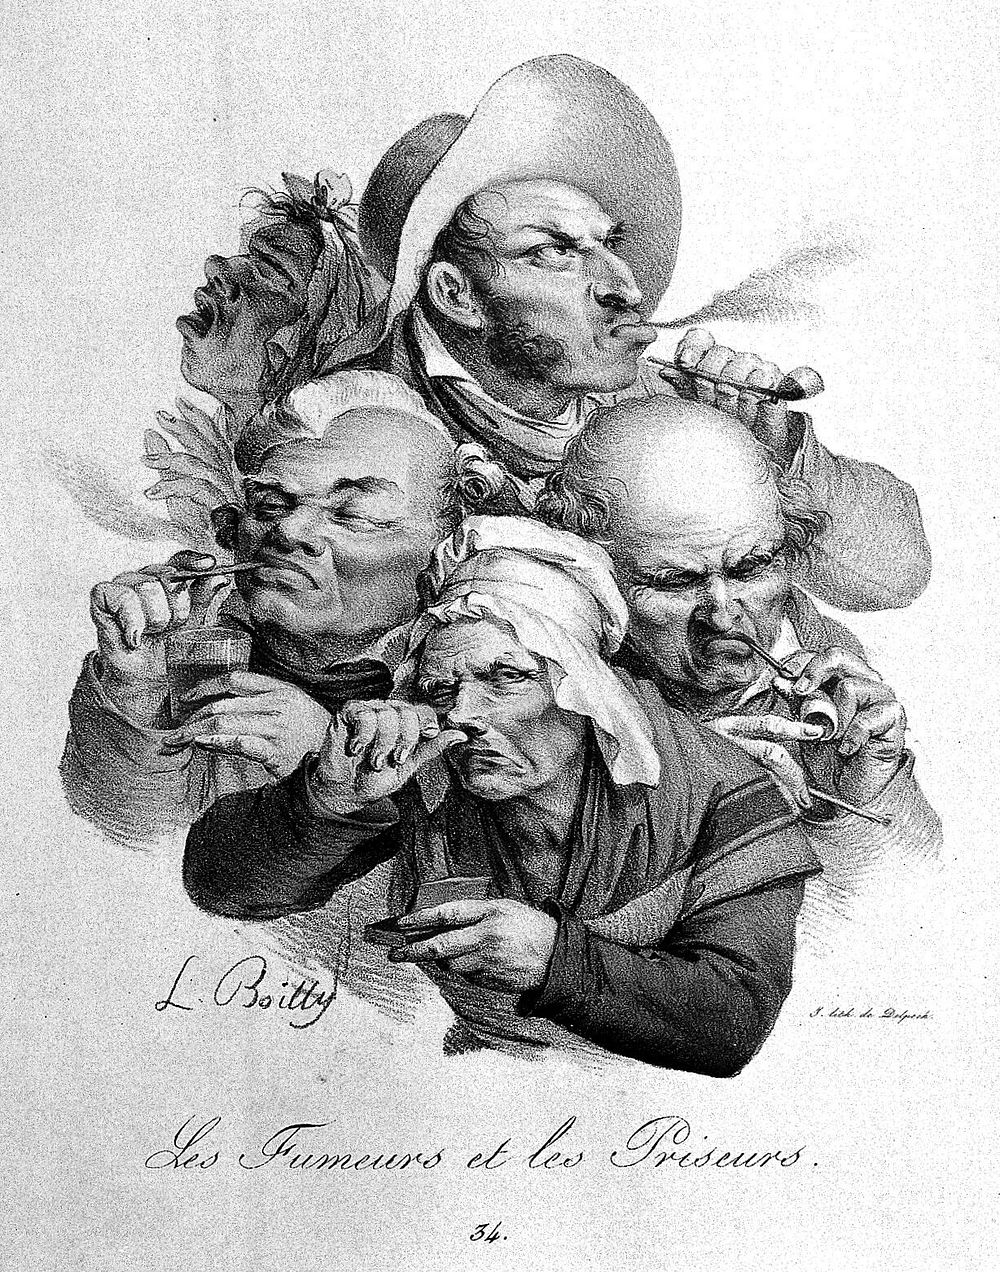 A group of five heads; three men smoking tobacco and two women taking snuff. Coloured lithograph by F-S. Delpech, c. 1825…